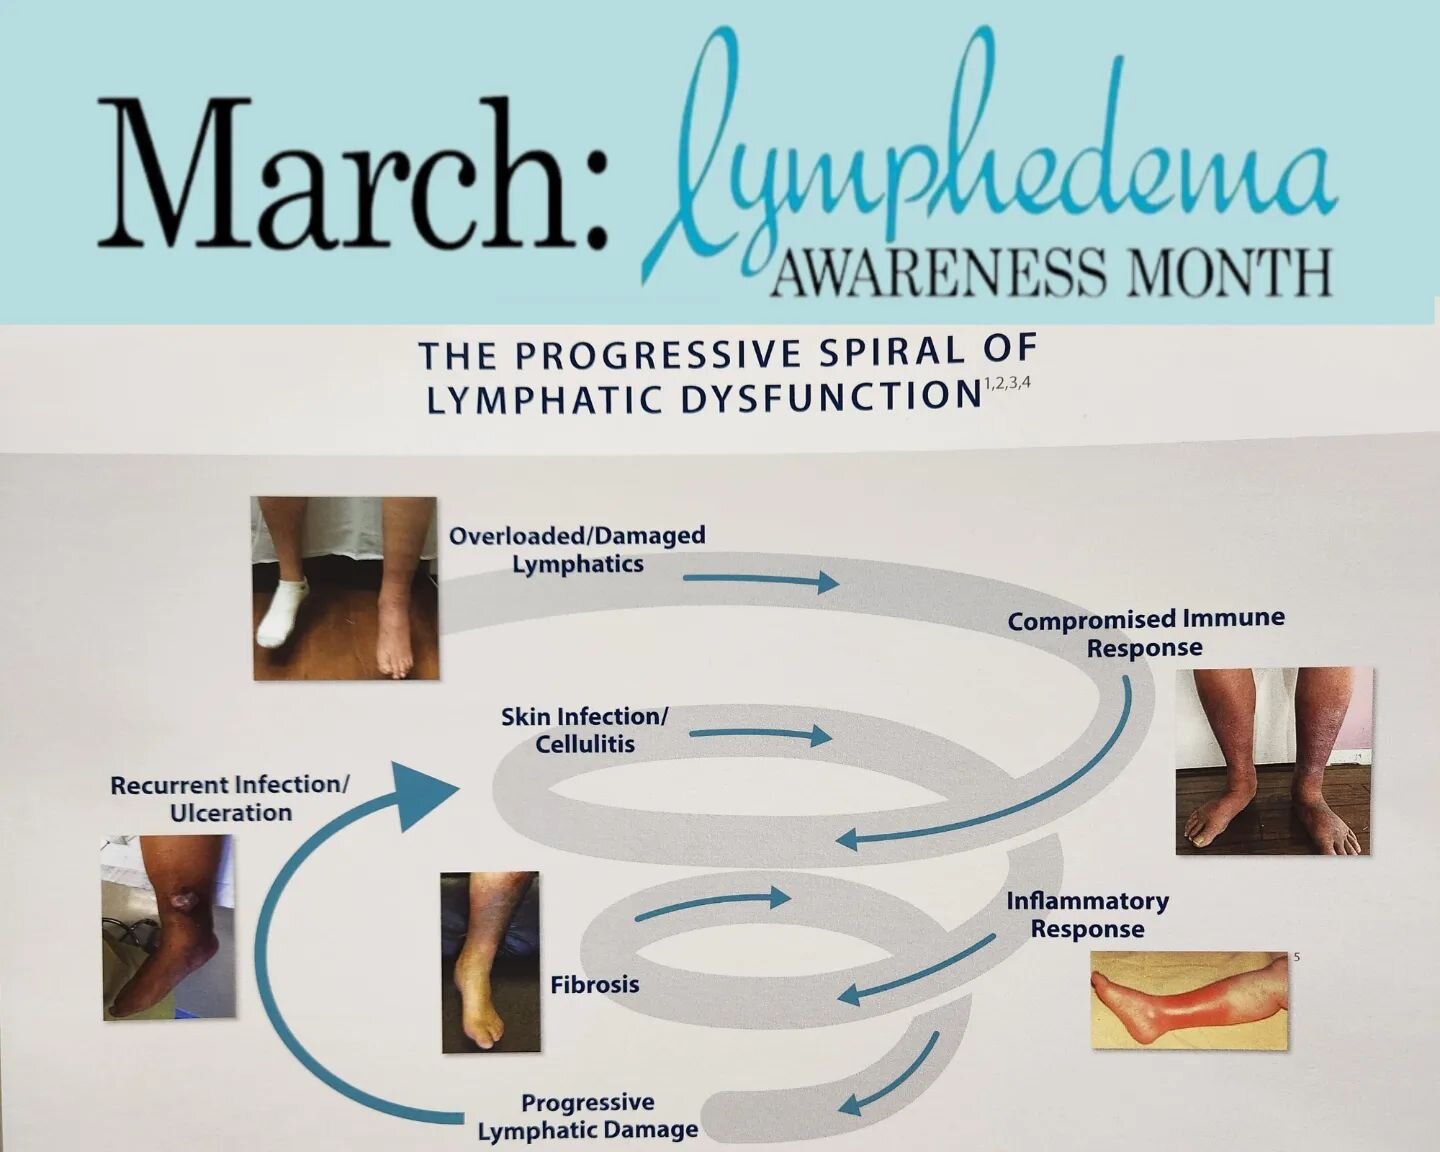 March is Lymphedema Awareness Month! Ask us today how we can help your swelling!

#jenmobilityrehab 
#occupationaltherapy 
#lymphedema 
#lymphedemaawarenessmonth